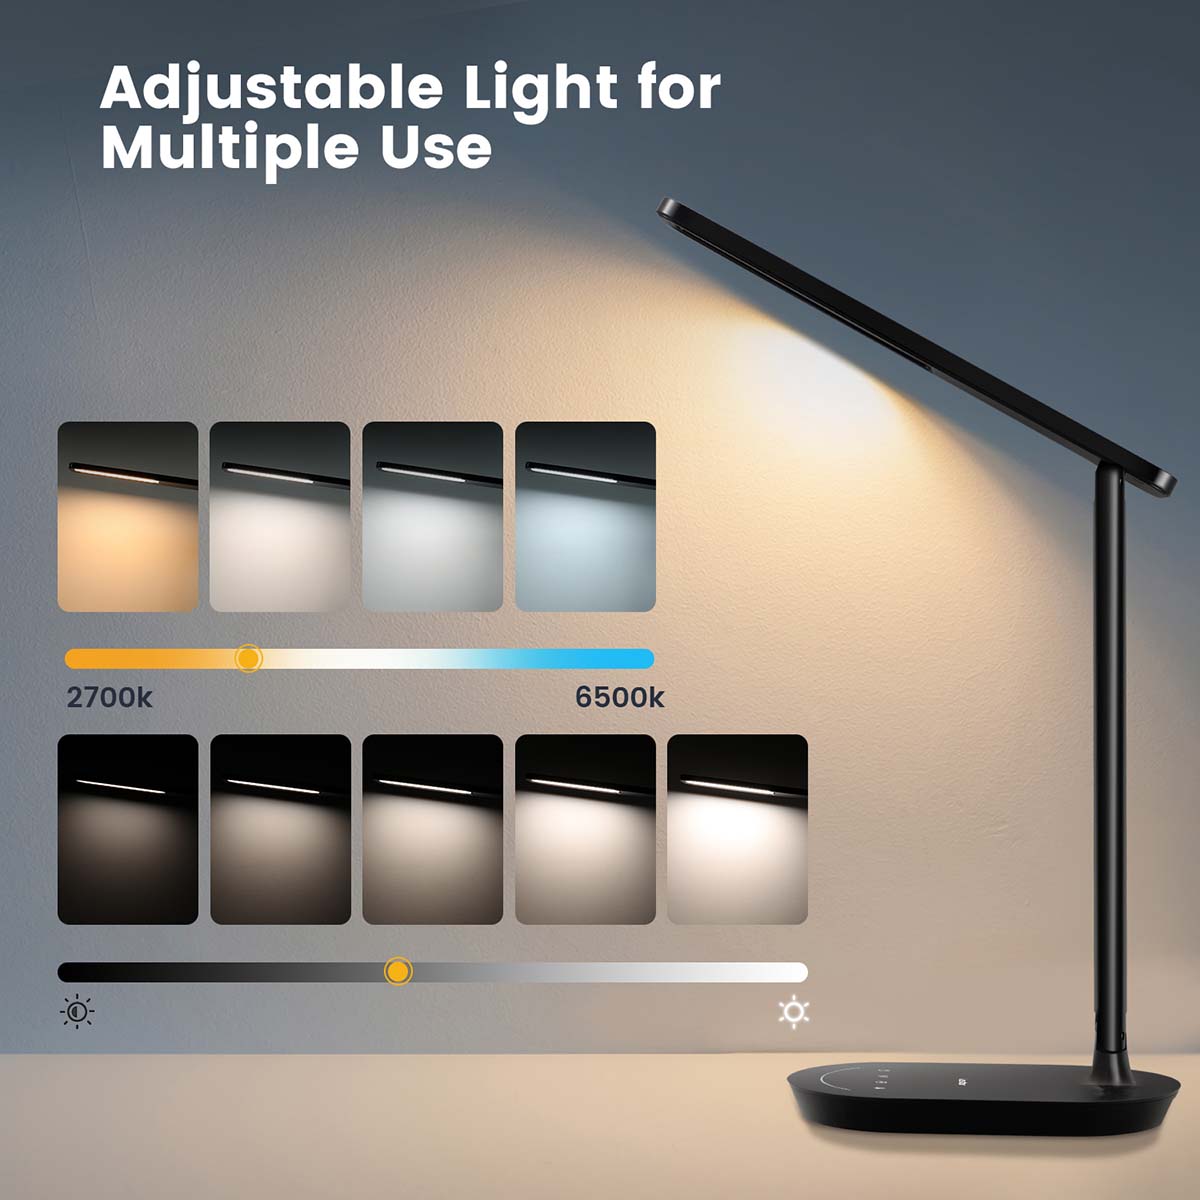 Smile Dimmable Eye-Protecting Table Lamp